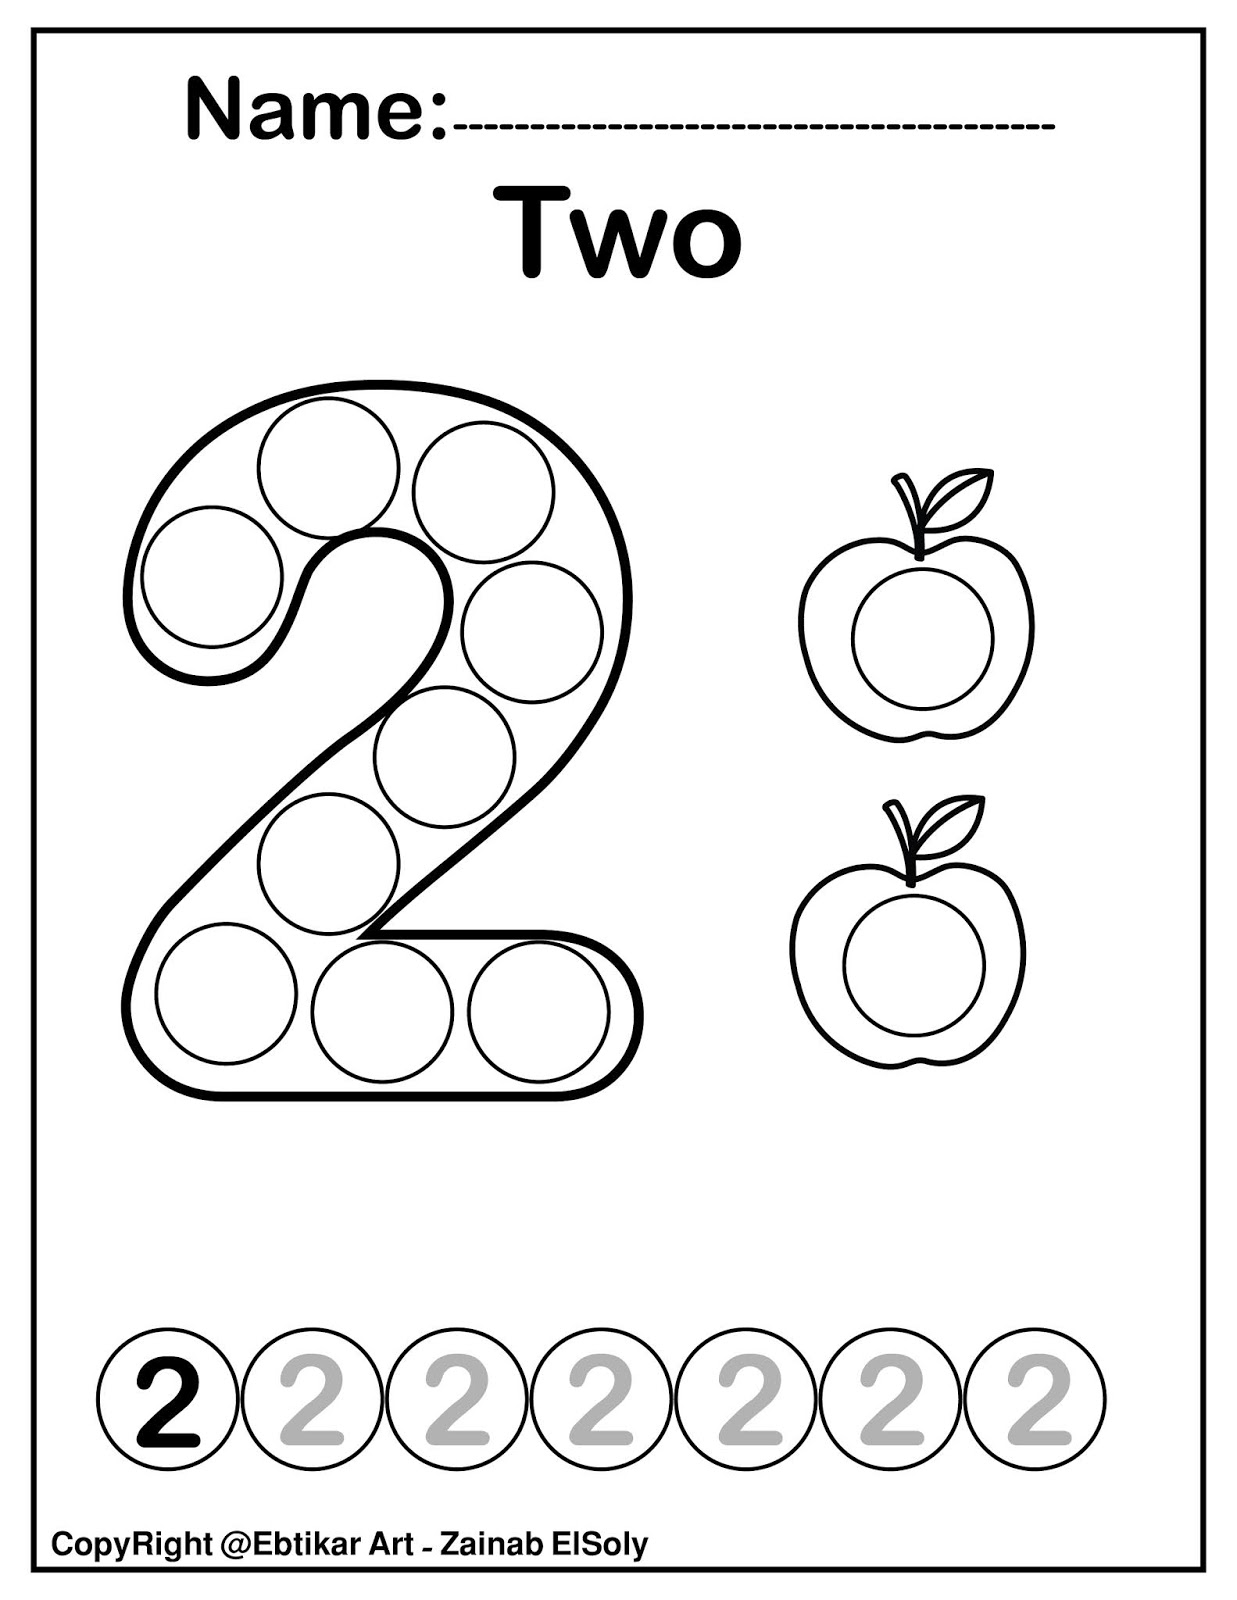 set-of-123-numbers-count-apples-dot-marker-activity-coloring-pages-for-kids